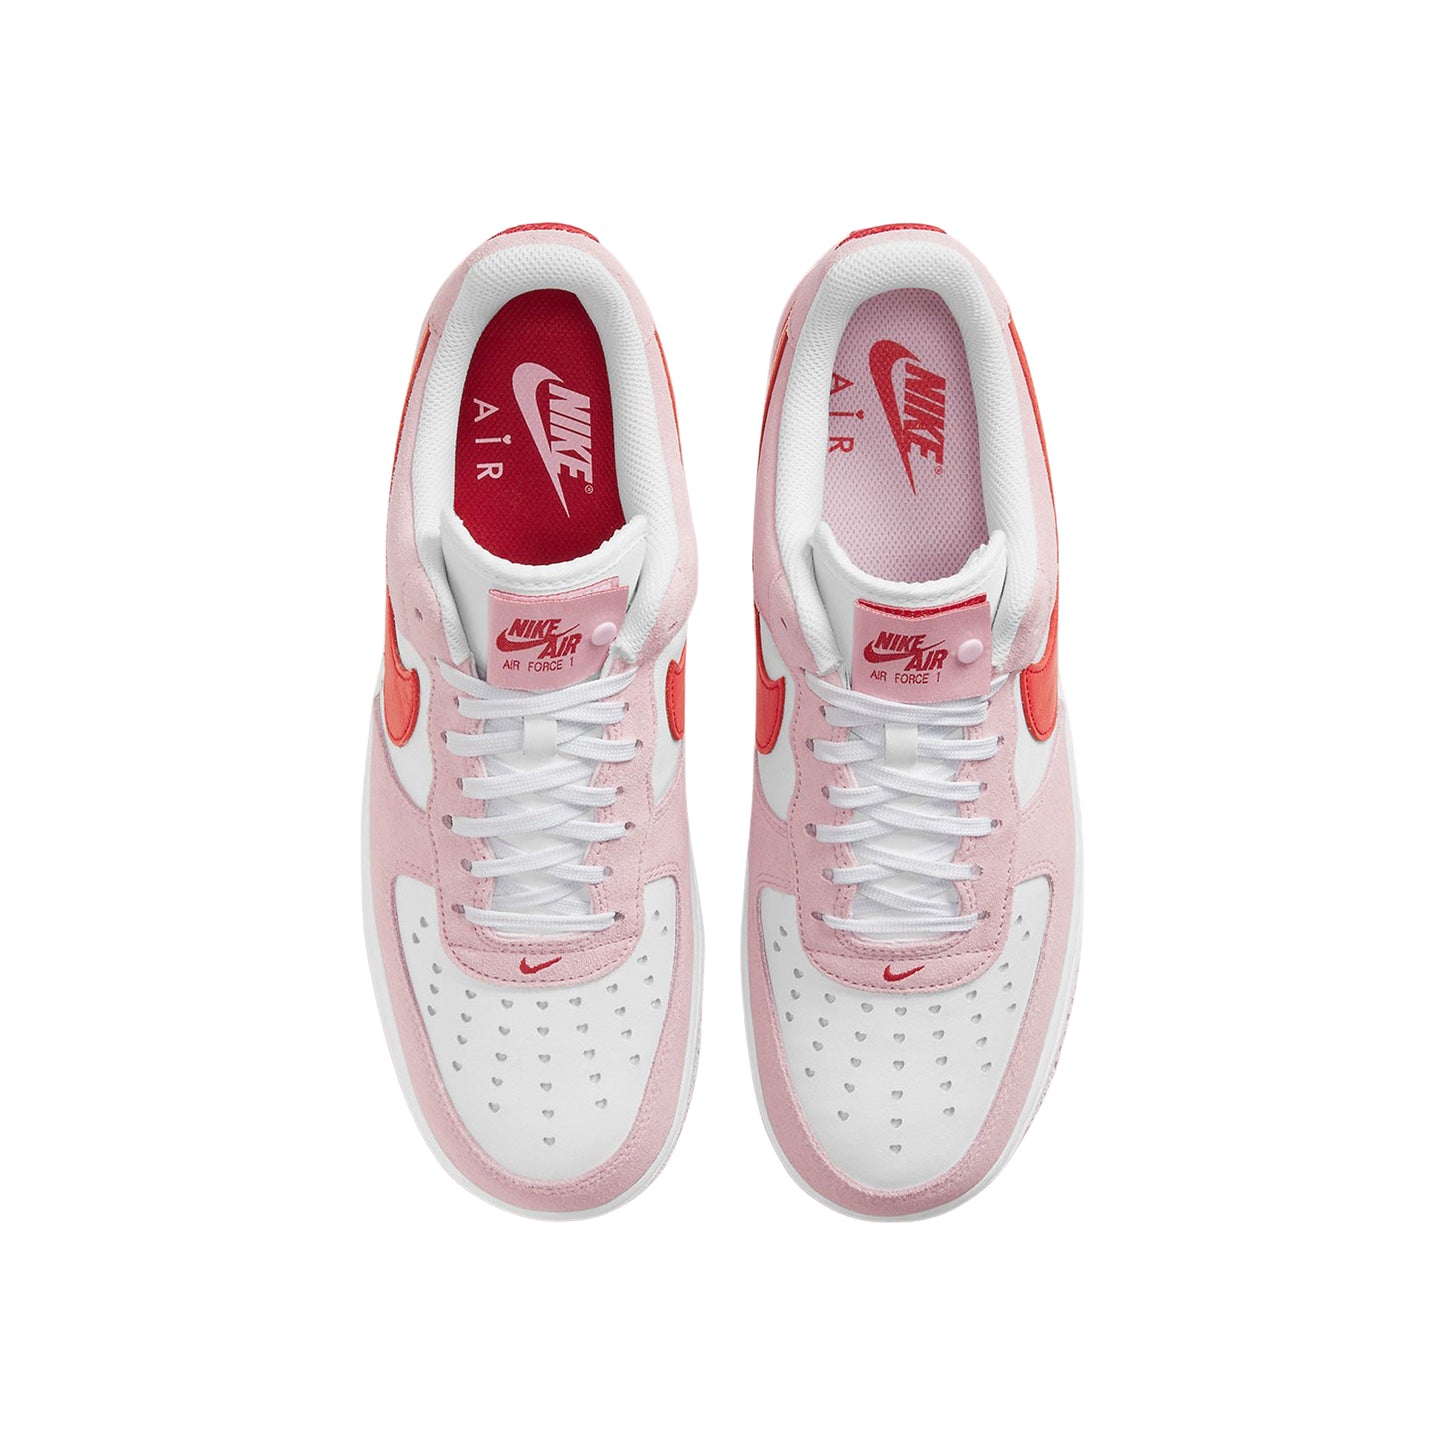 Nike Air Force 1 Low Valentines Day Love Letter